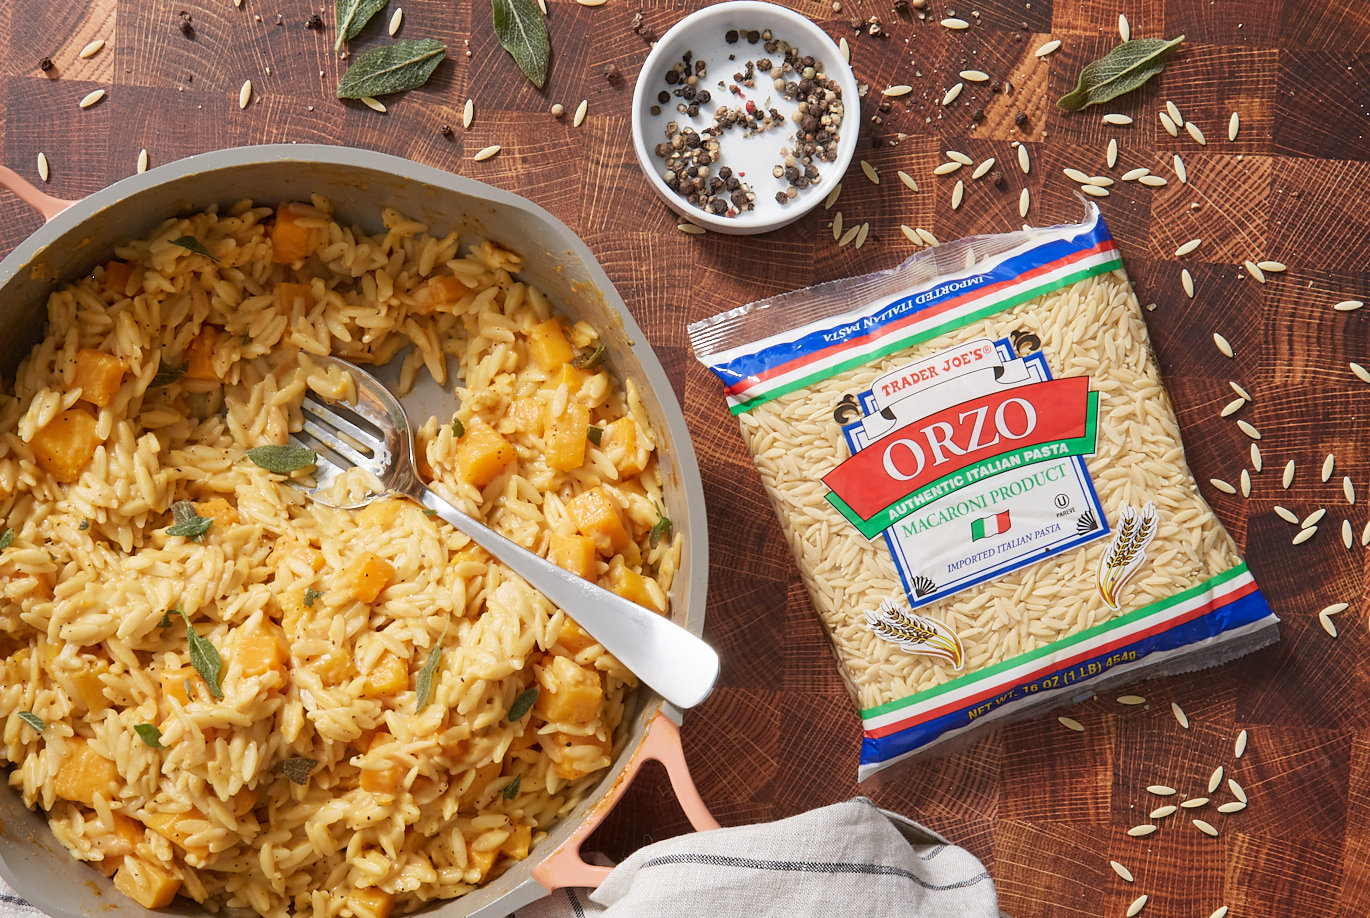 Trader Joe's Orzo Italian Pasta, used in recipe for 'Cacio e Peppe Orzotto with Butternut Squash and sage'; prepared in pan, with fried sage leaves garnish